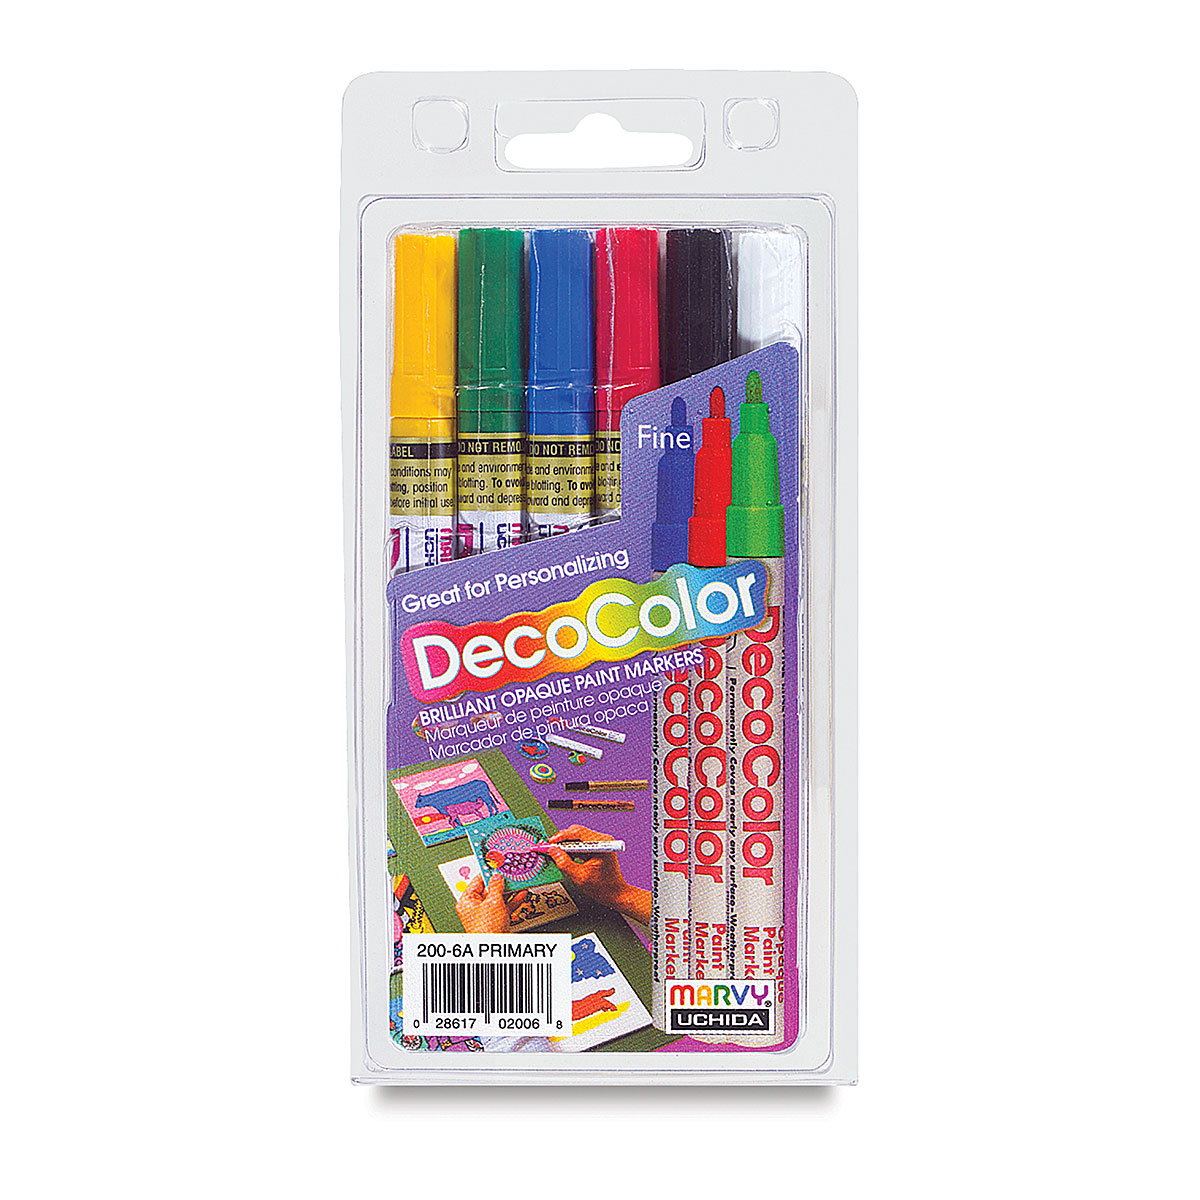 Marvy DecoColor Paint Markers (black and light green) 